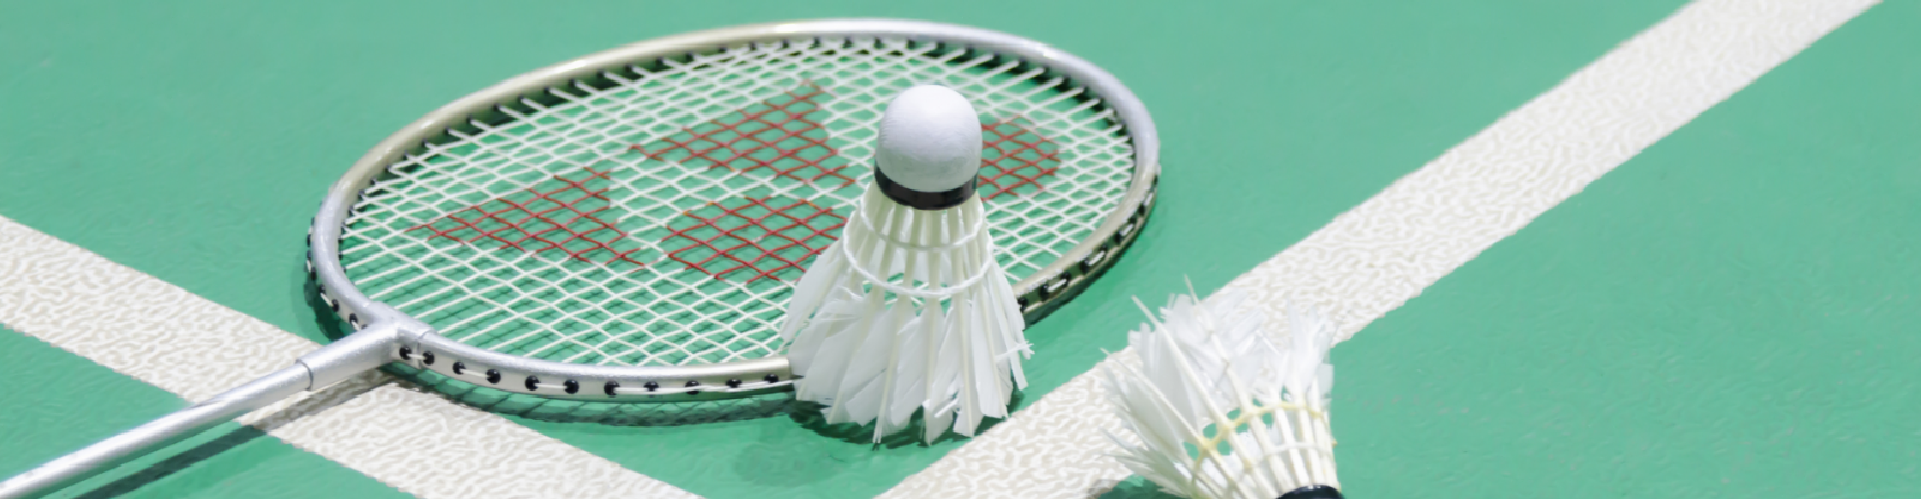 Cyient and Pullela Gopichand Badminton Academy Join Forces to Present the Second Edition of Corporate Badminton League